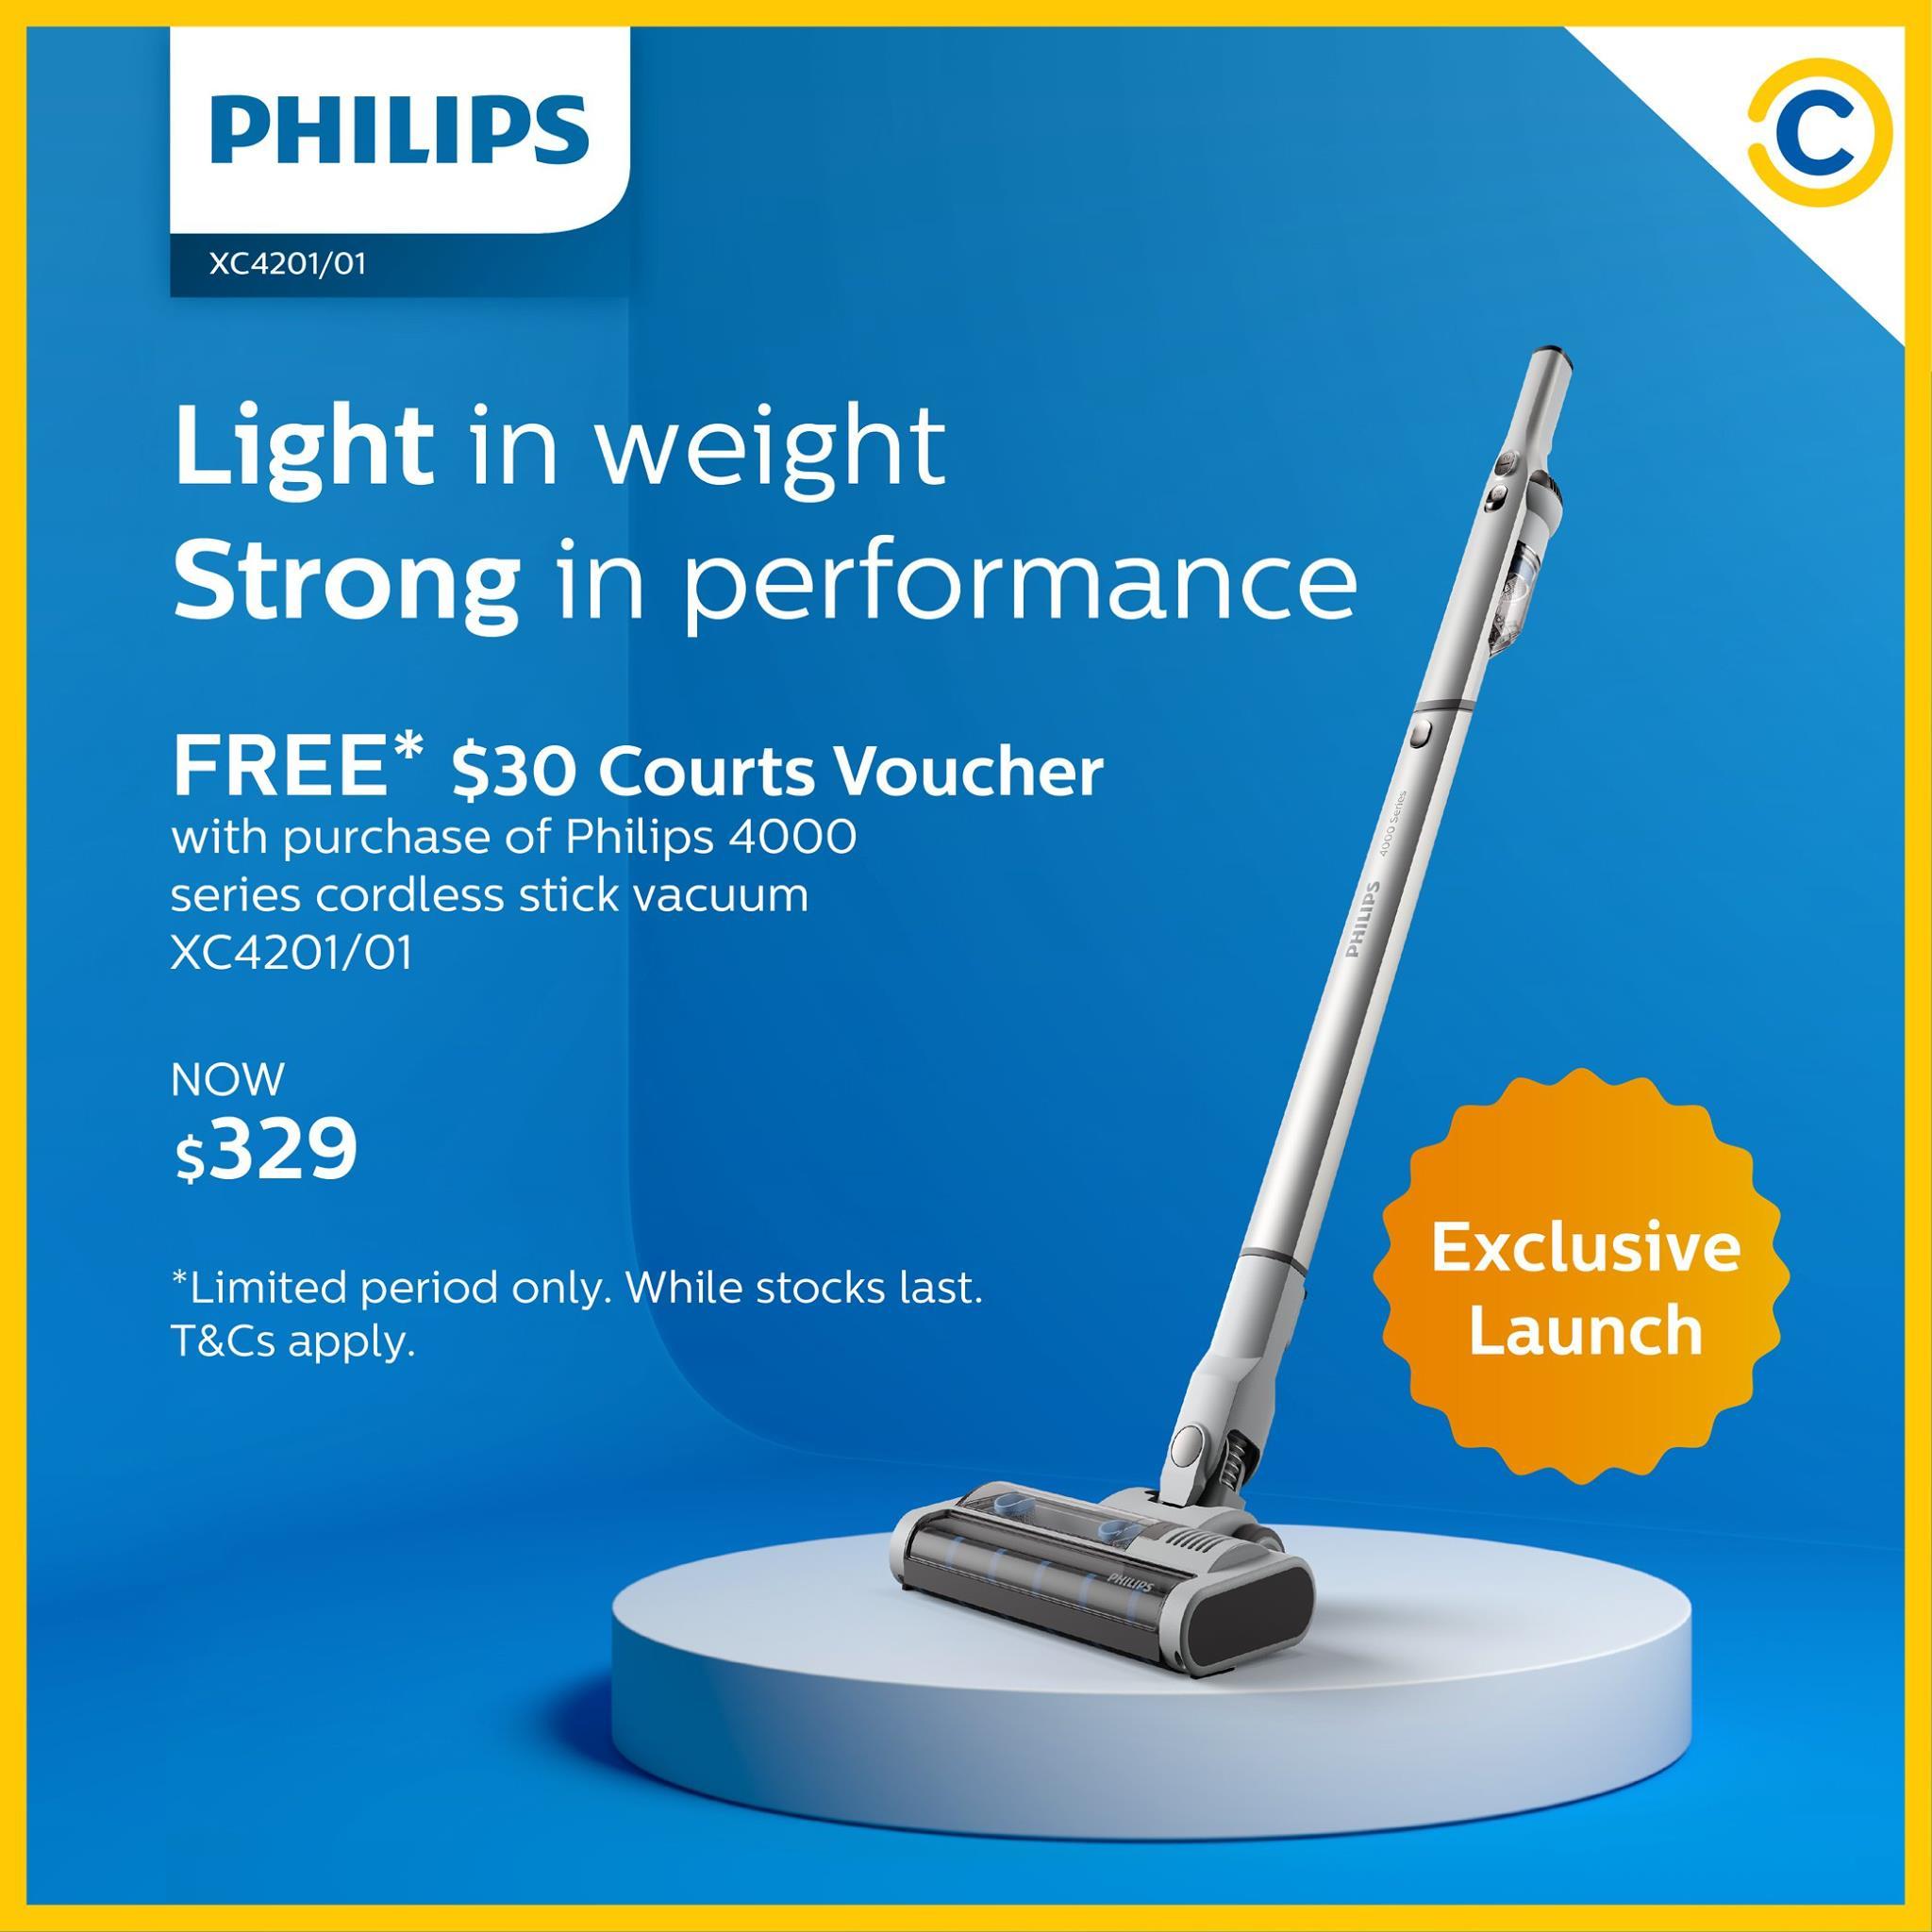 Philips 4000 series Special Launch Price $329 and receive additional $30 COURTS Voucher